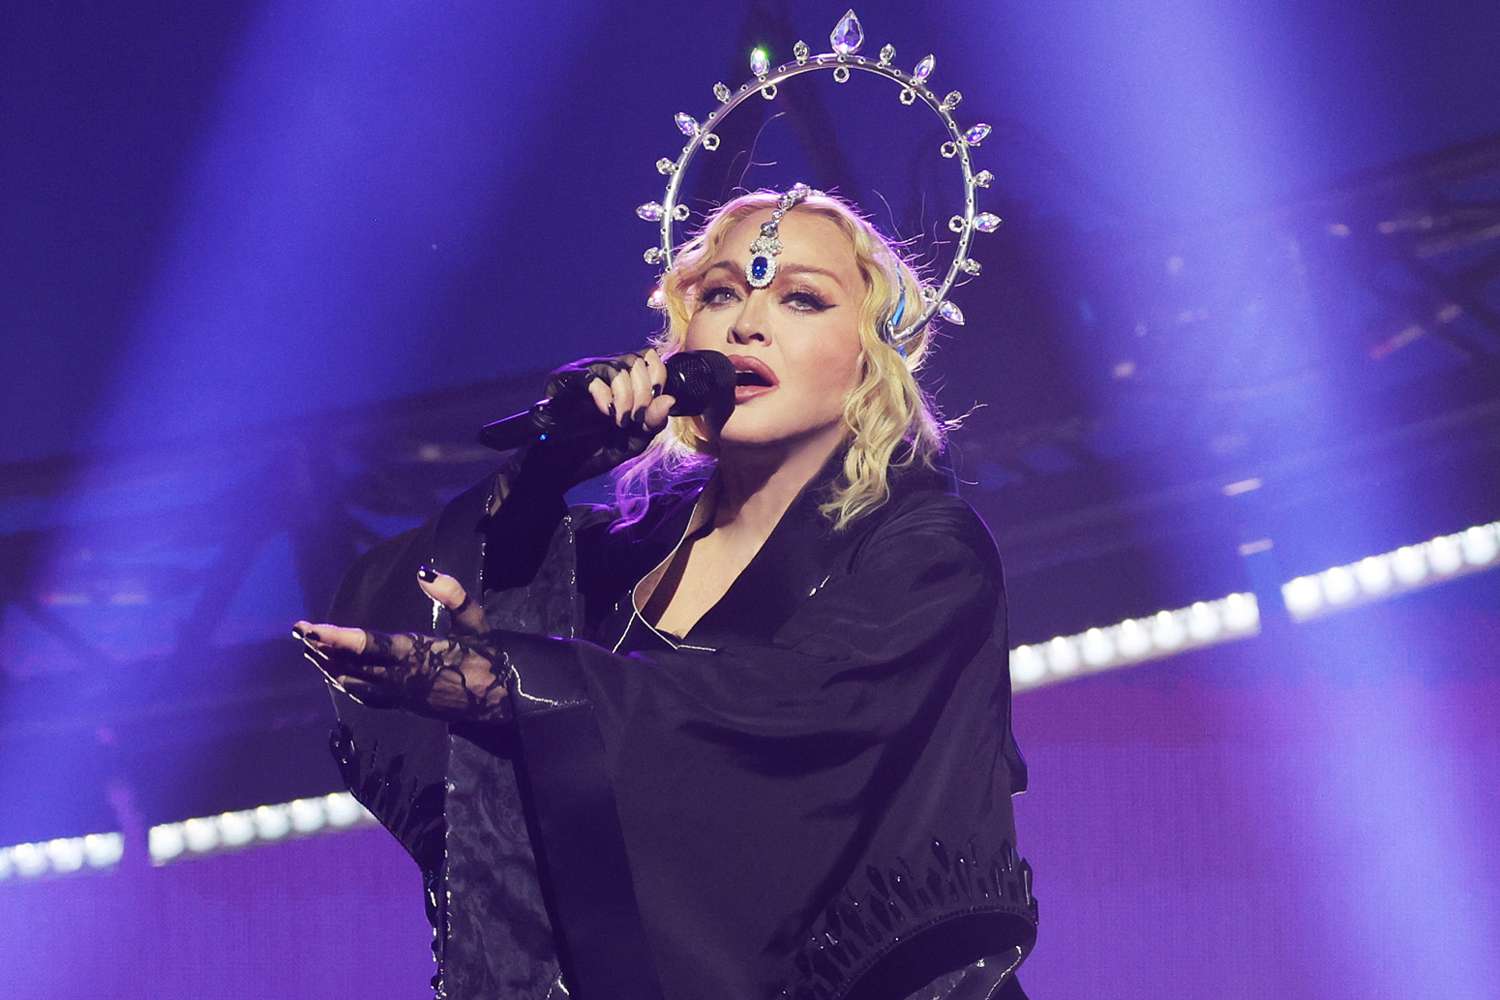 Madonna will perform free show on Copacabana beach in RJ